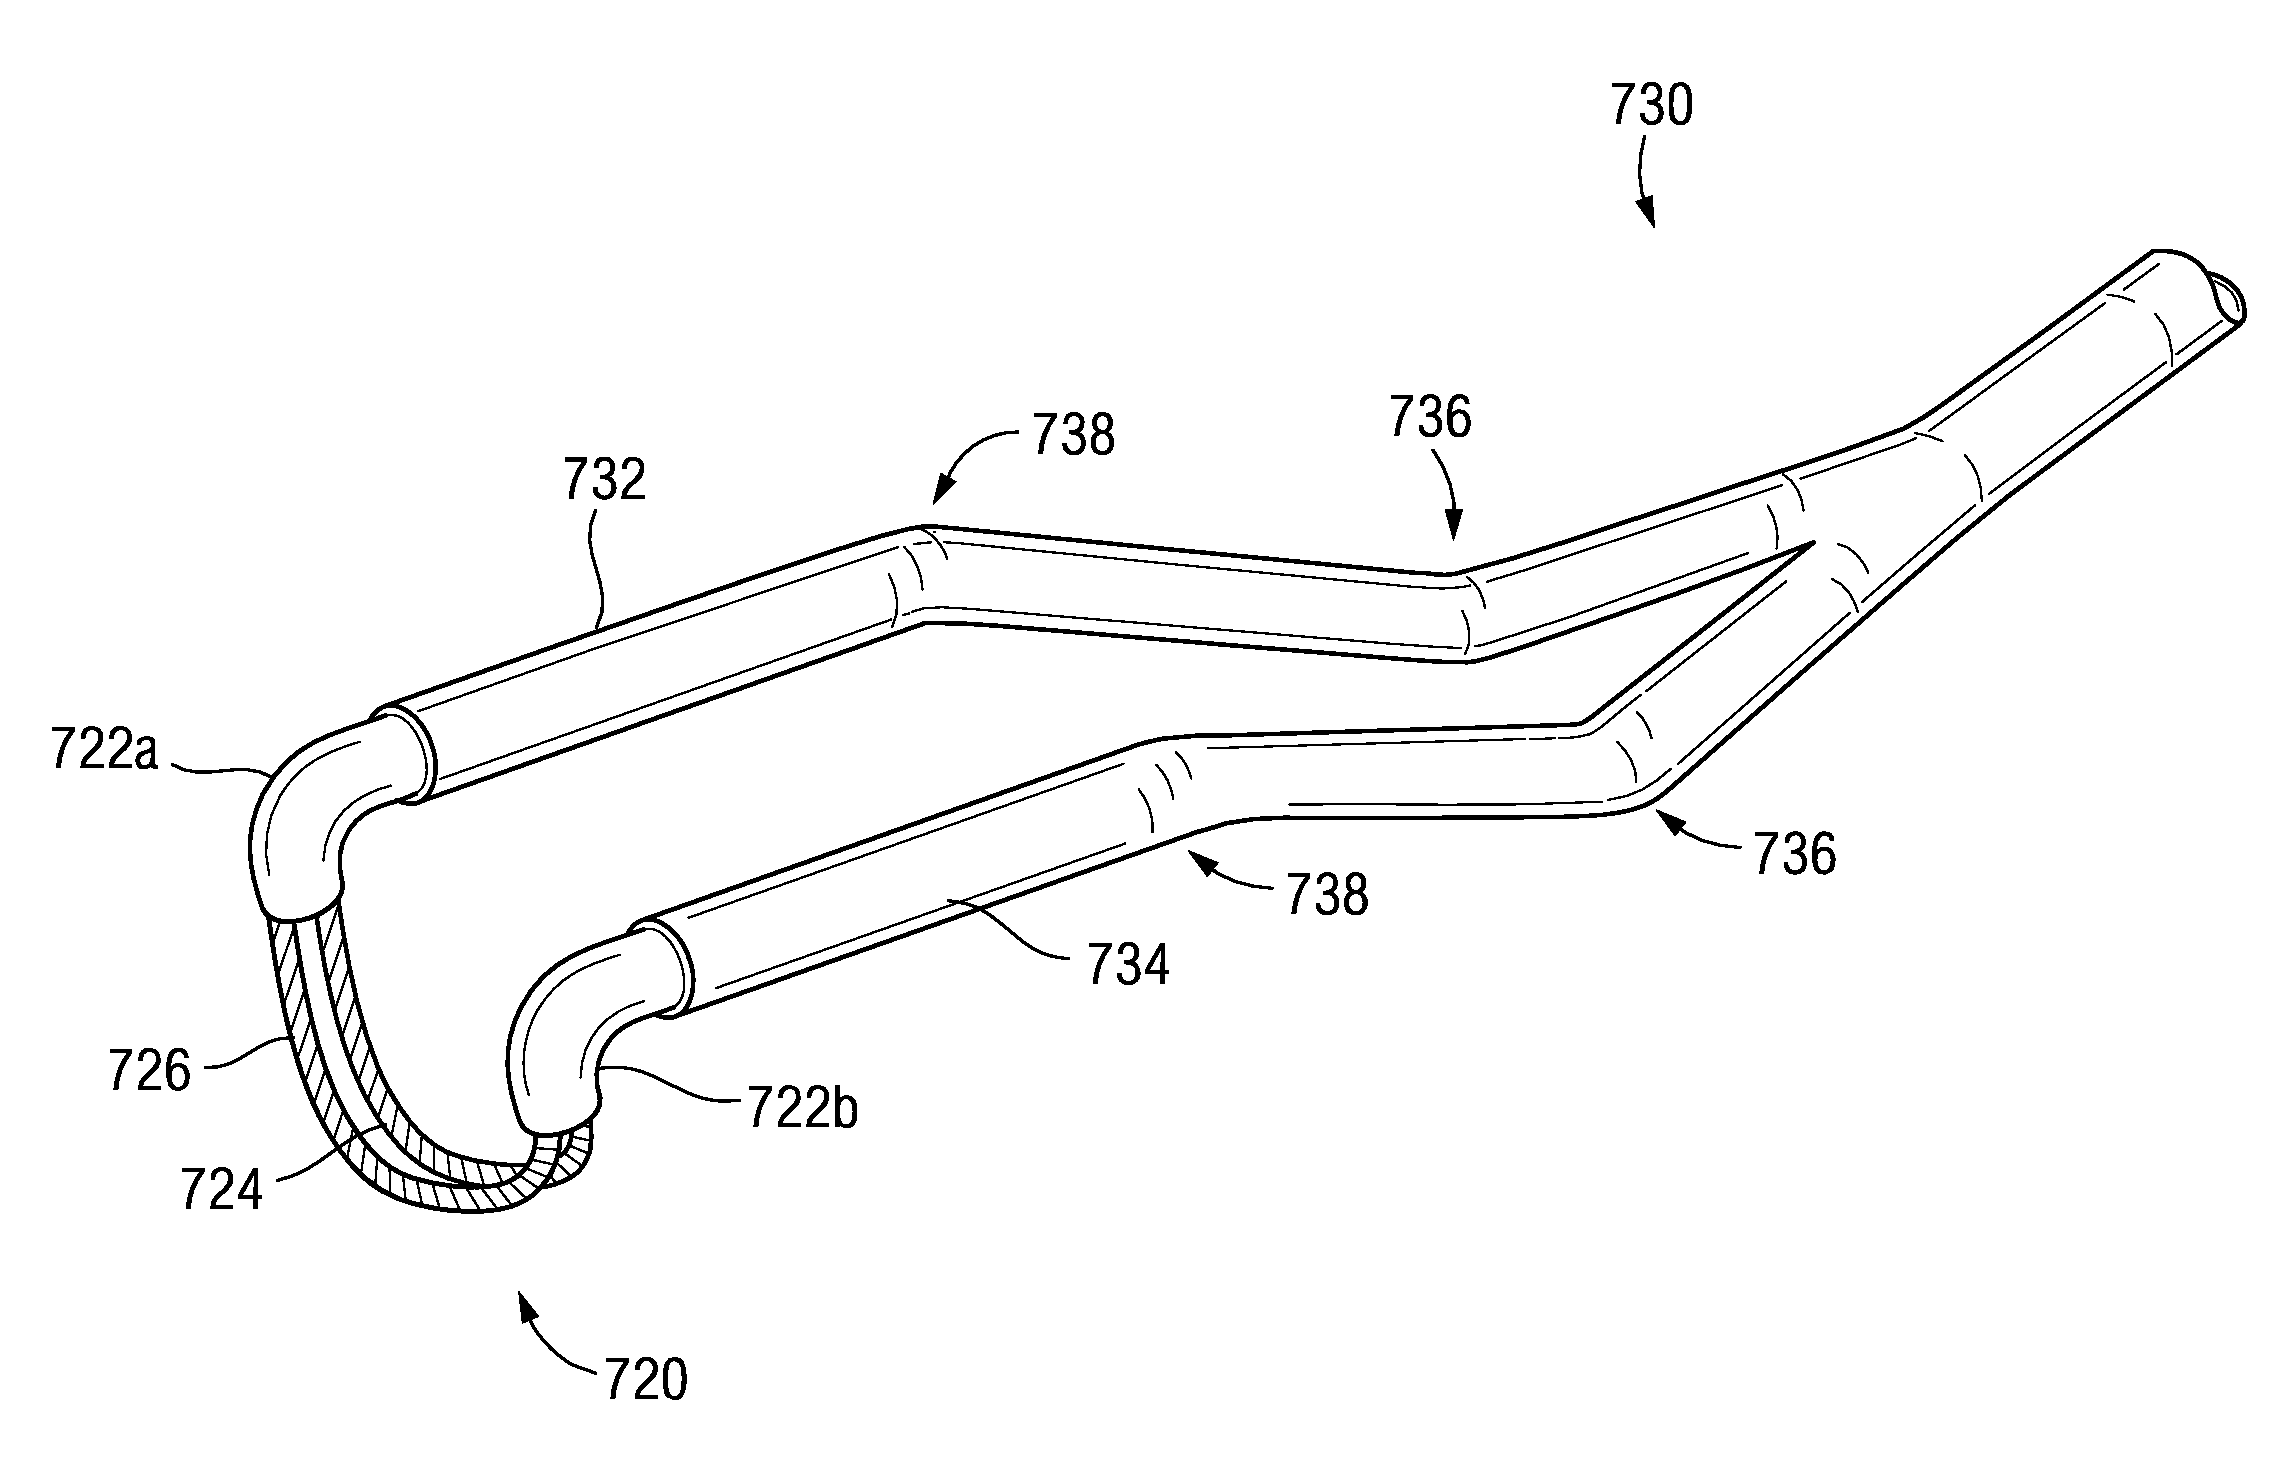 Apparatus and methods for electrosurgical ablation and resection of target tissue